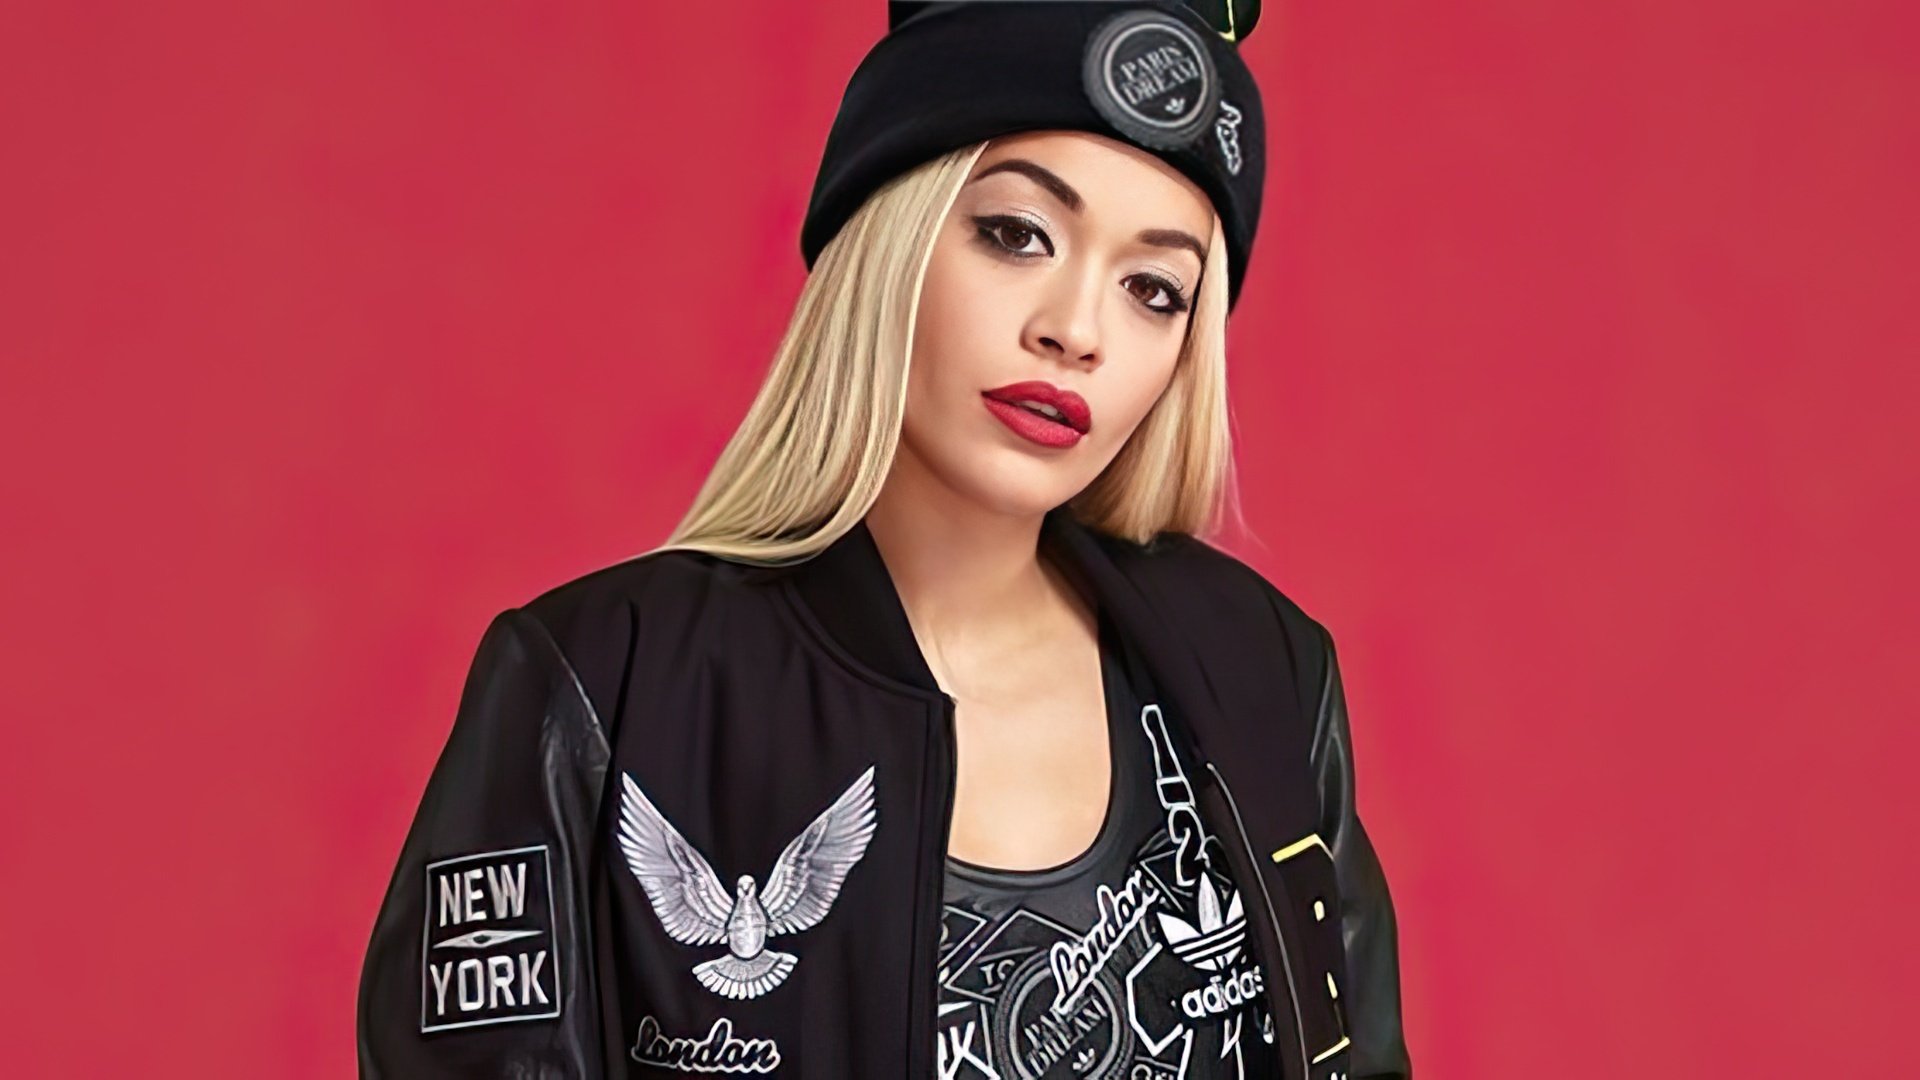 In 2014, Rita launched her own clothing line